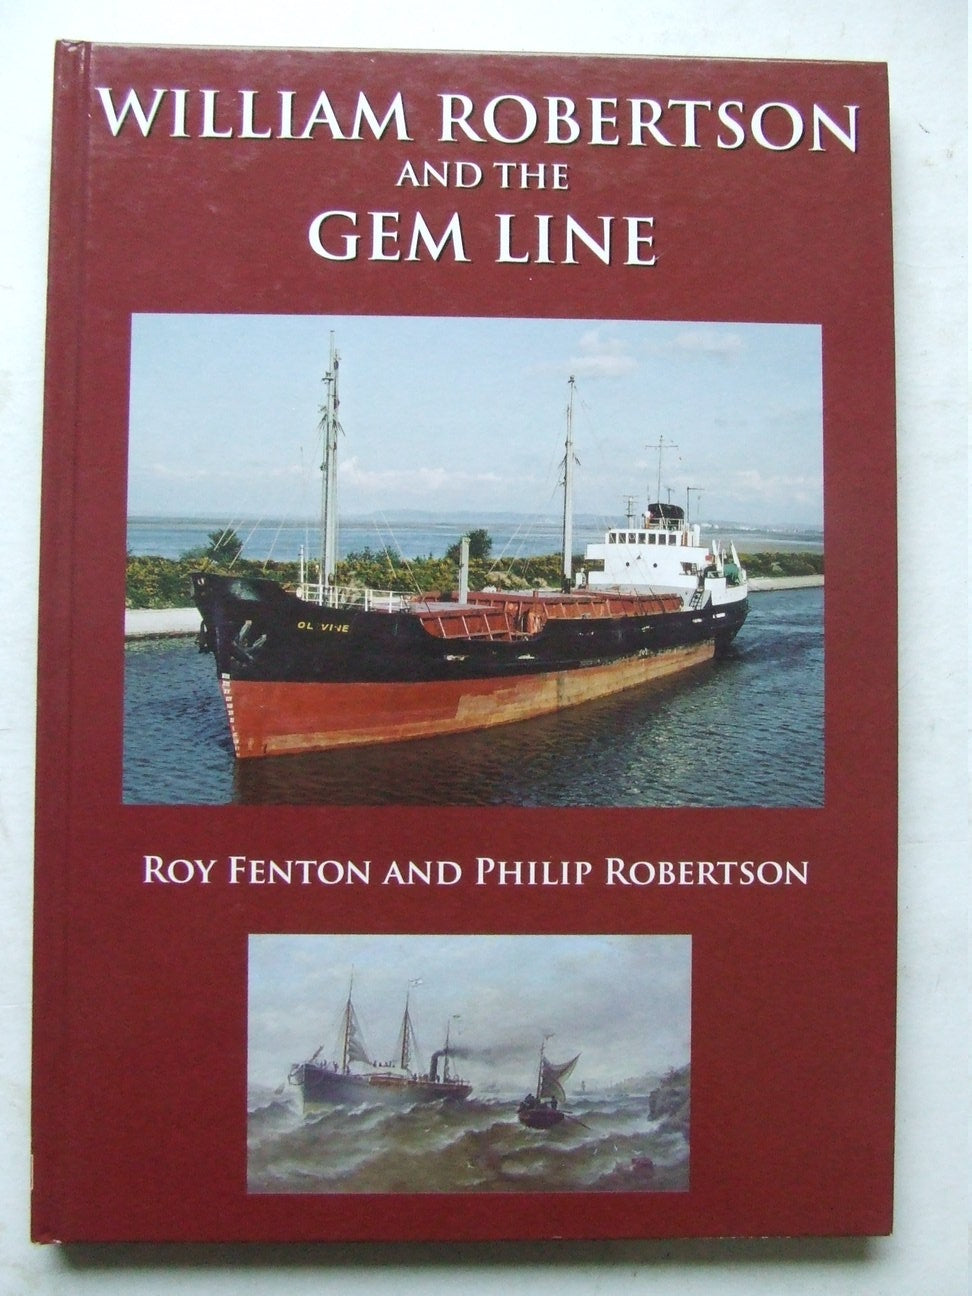 William Robertson and the Gem Line